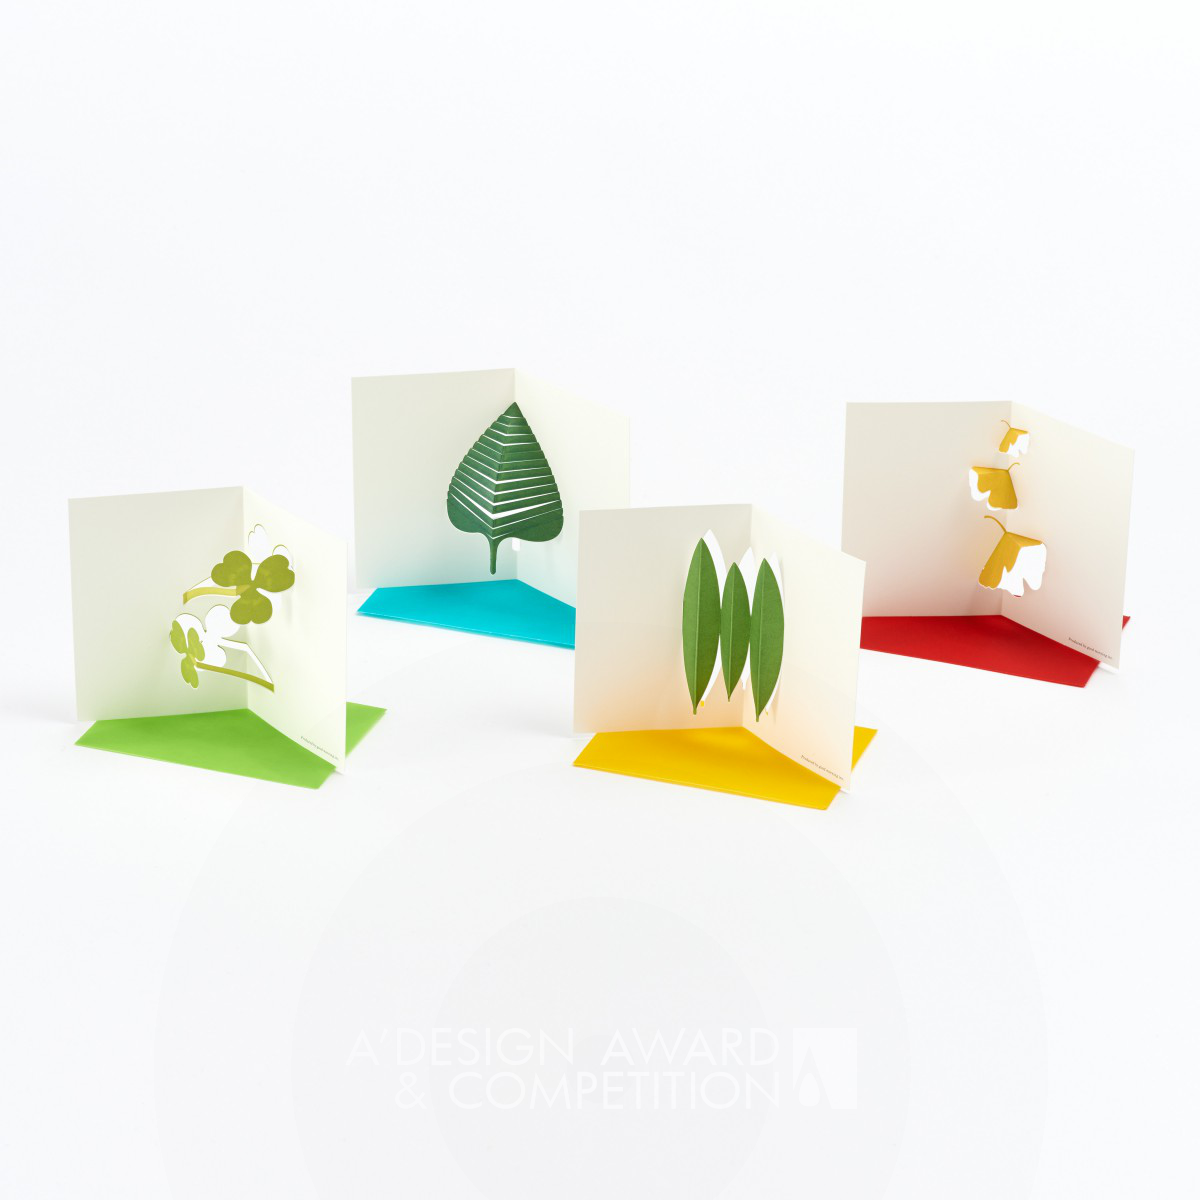 Pop-up Message Card “Leaves” Message Card by Katsumi Tamura